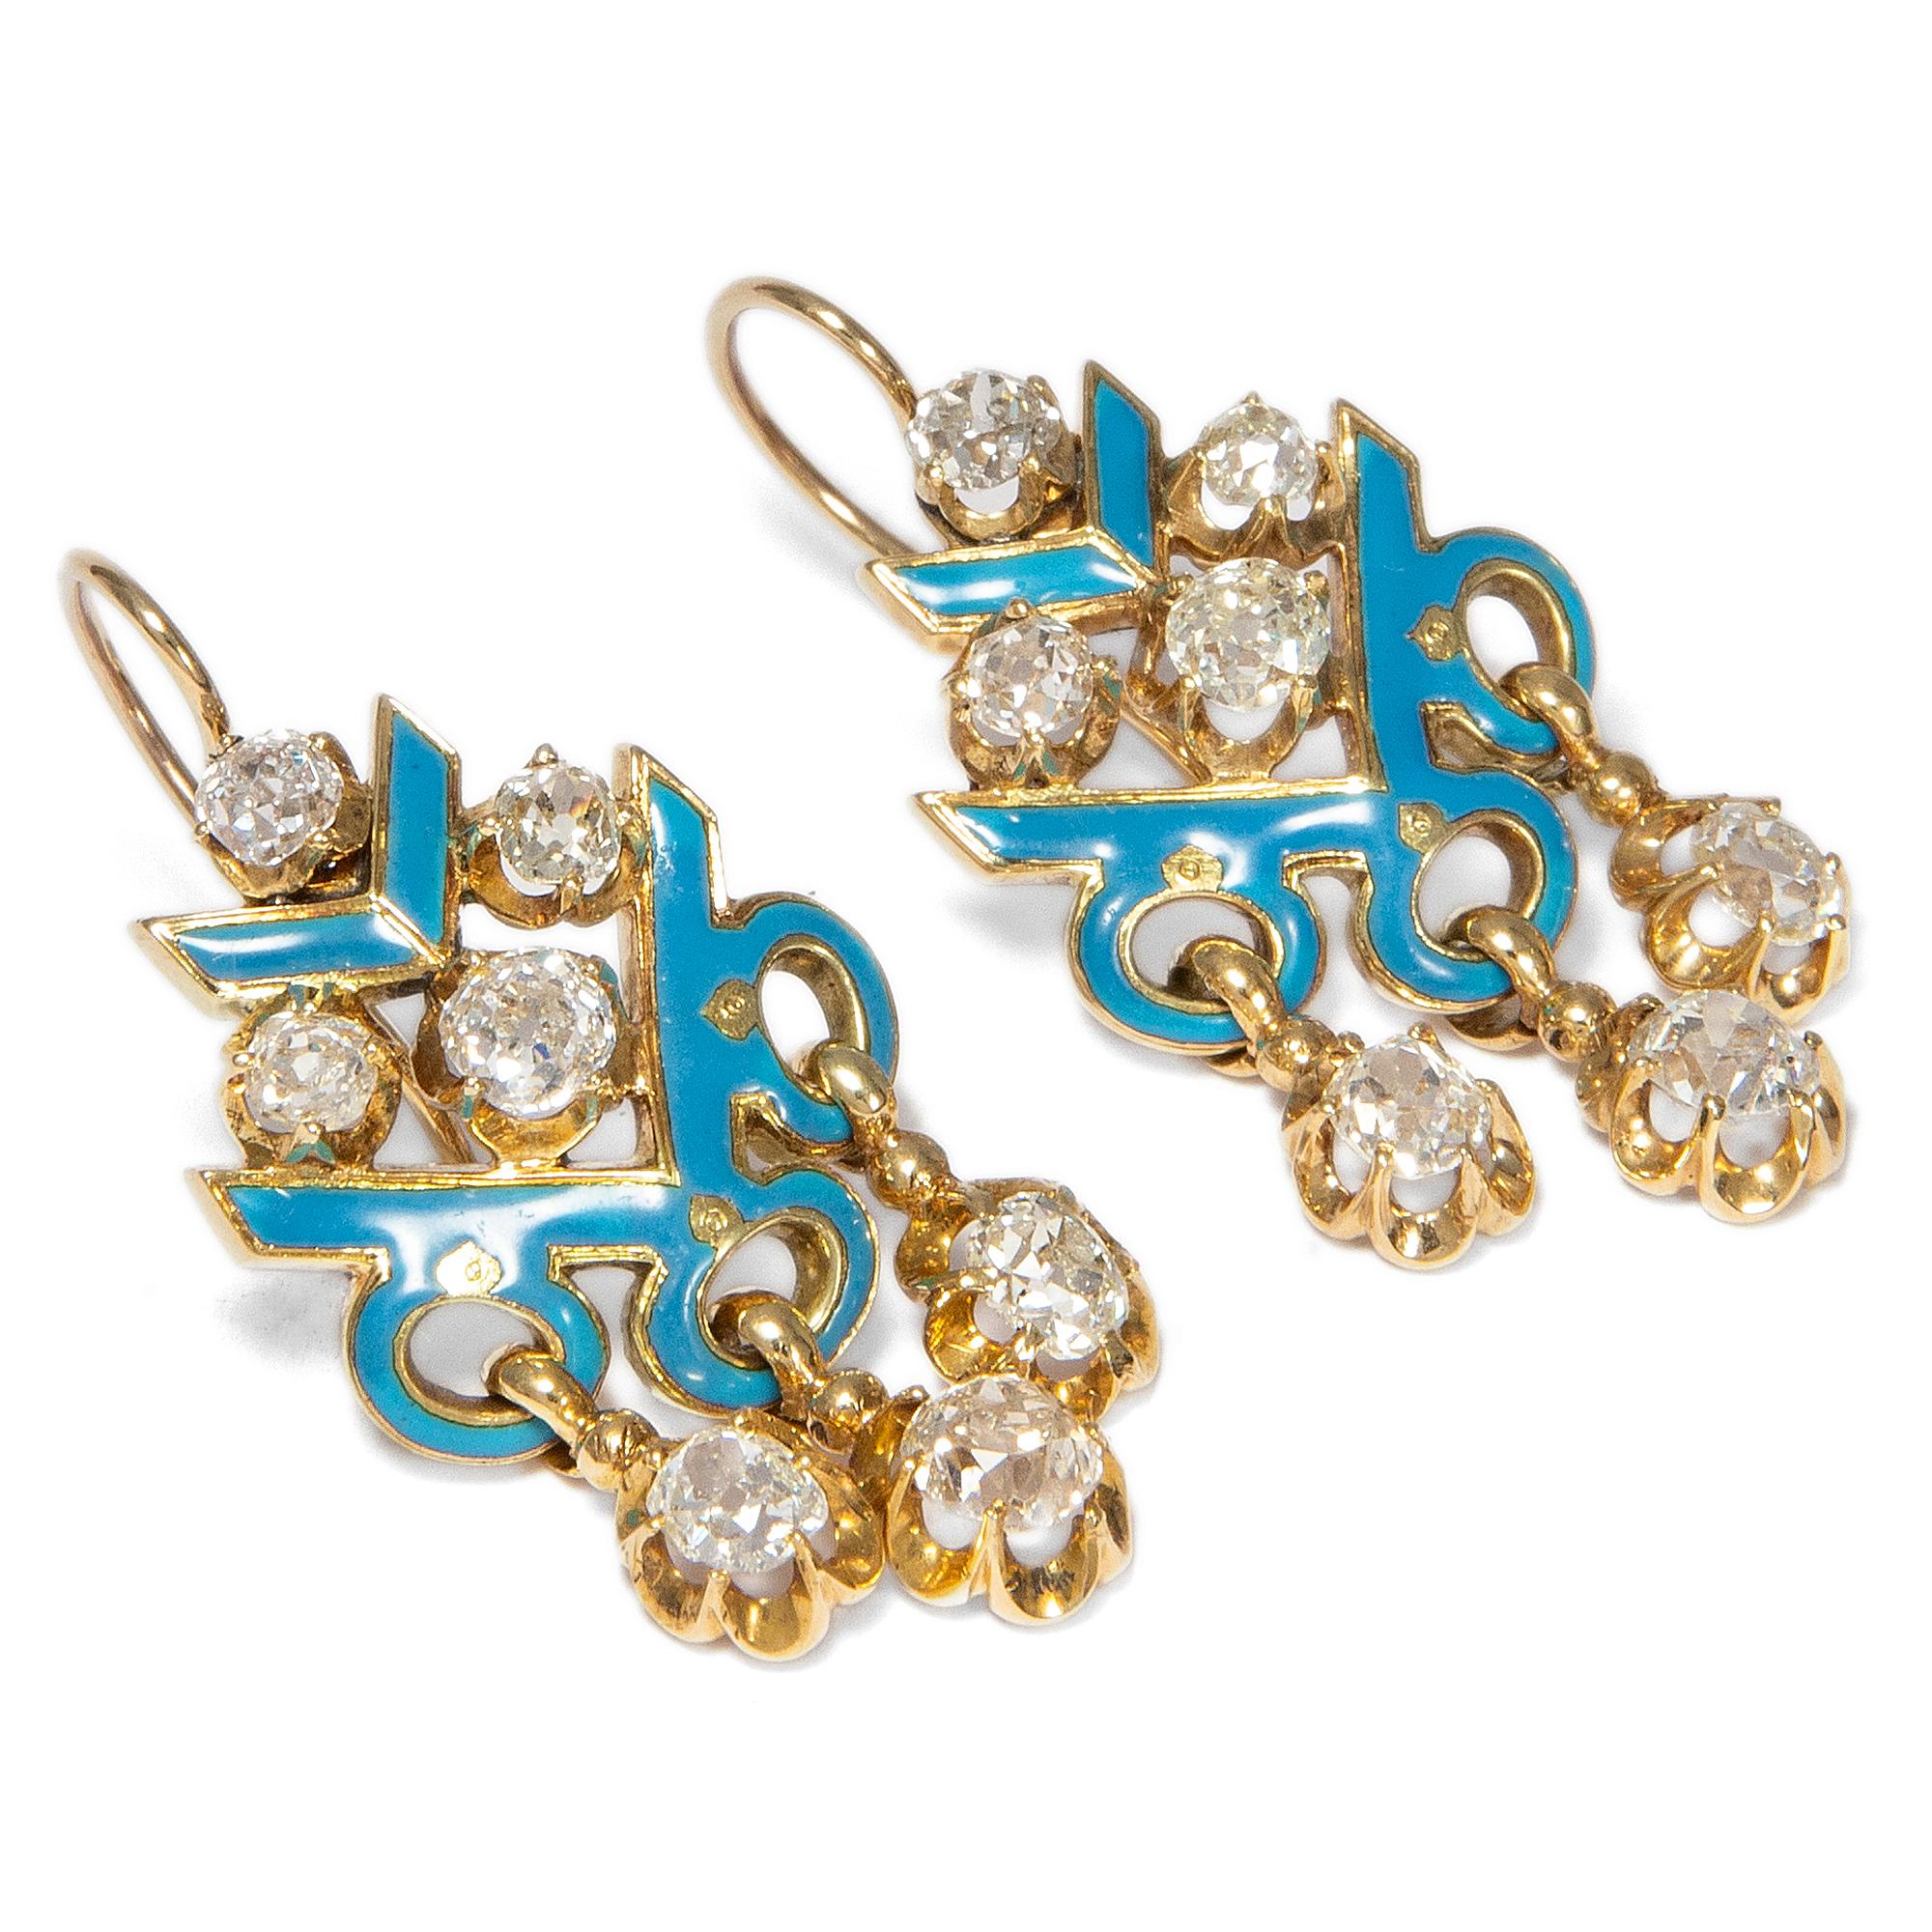 In centuries past, jewellery was rarely made without meaning. Shape and form, but also materials were usually the bearers of messages of friendship, power or romance. In the mid-19th century, the colour turquoise, along with the stone of the same